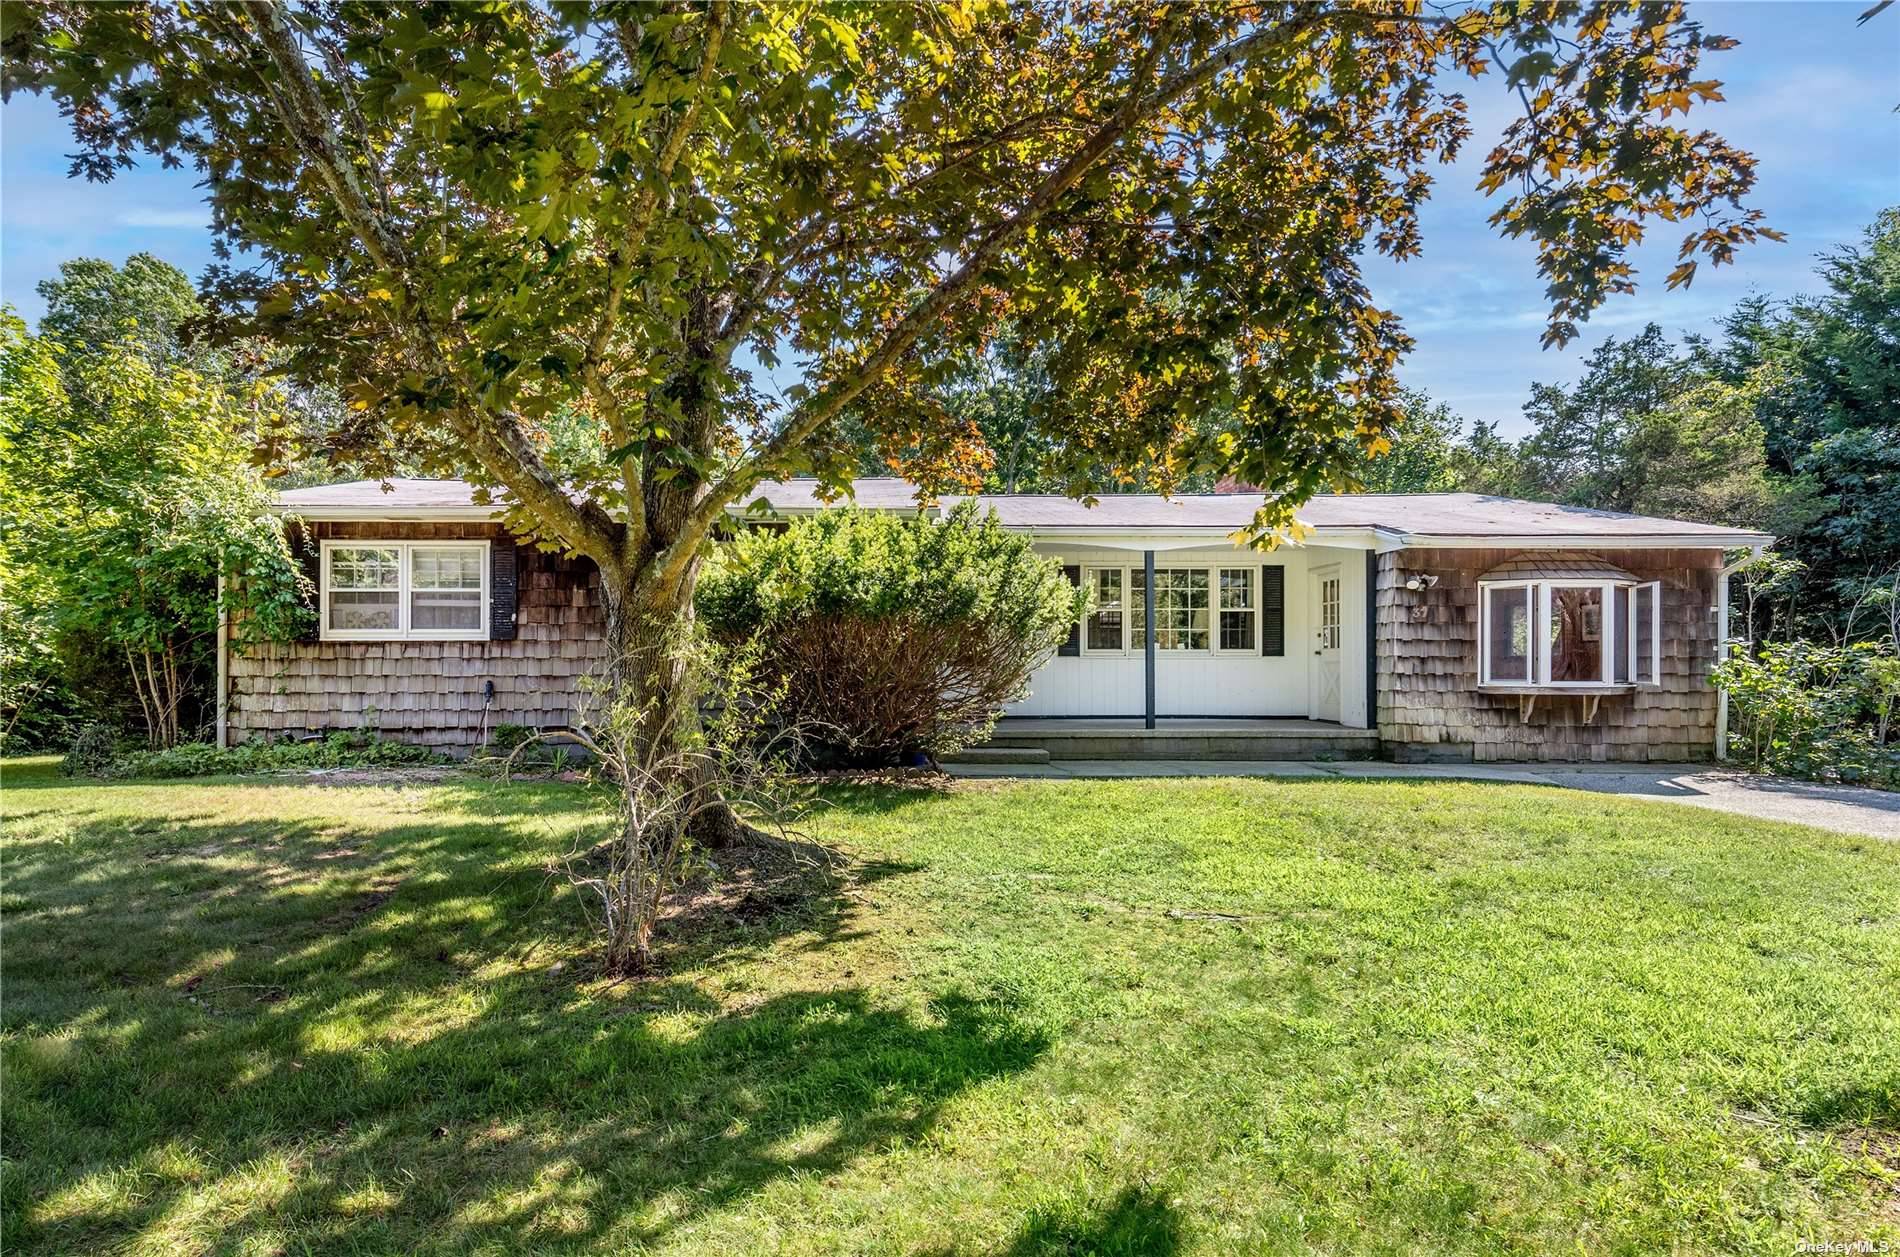 Make this East Quogue ranch your next home.